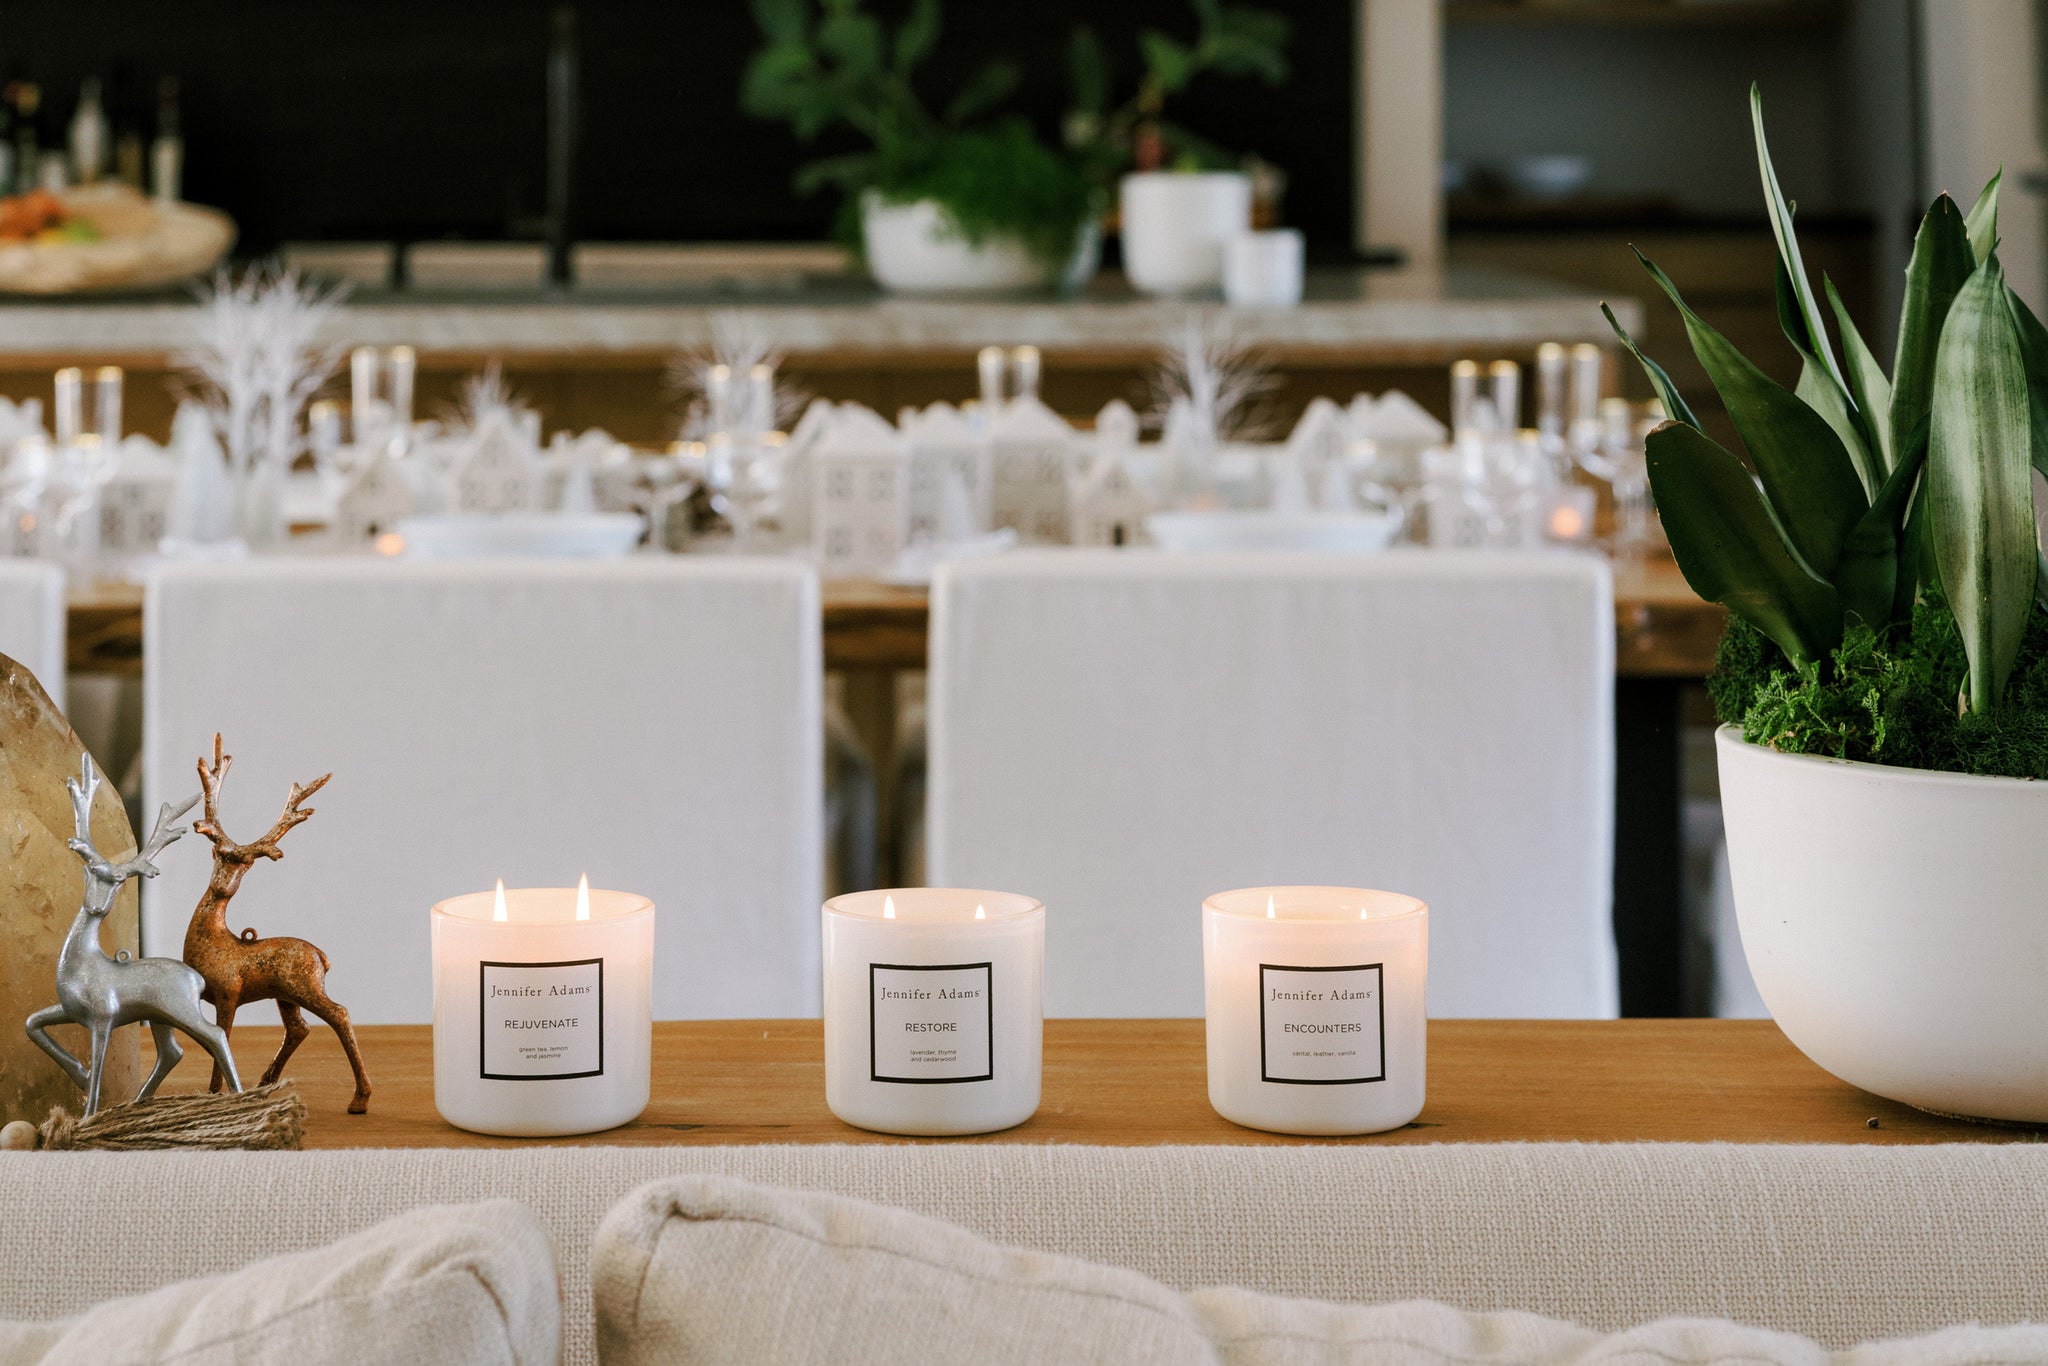 Group of scented candles in warm, welcoming scents